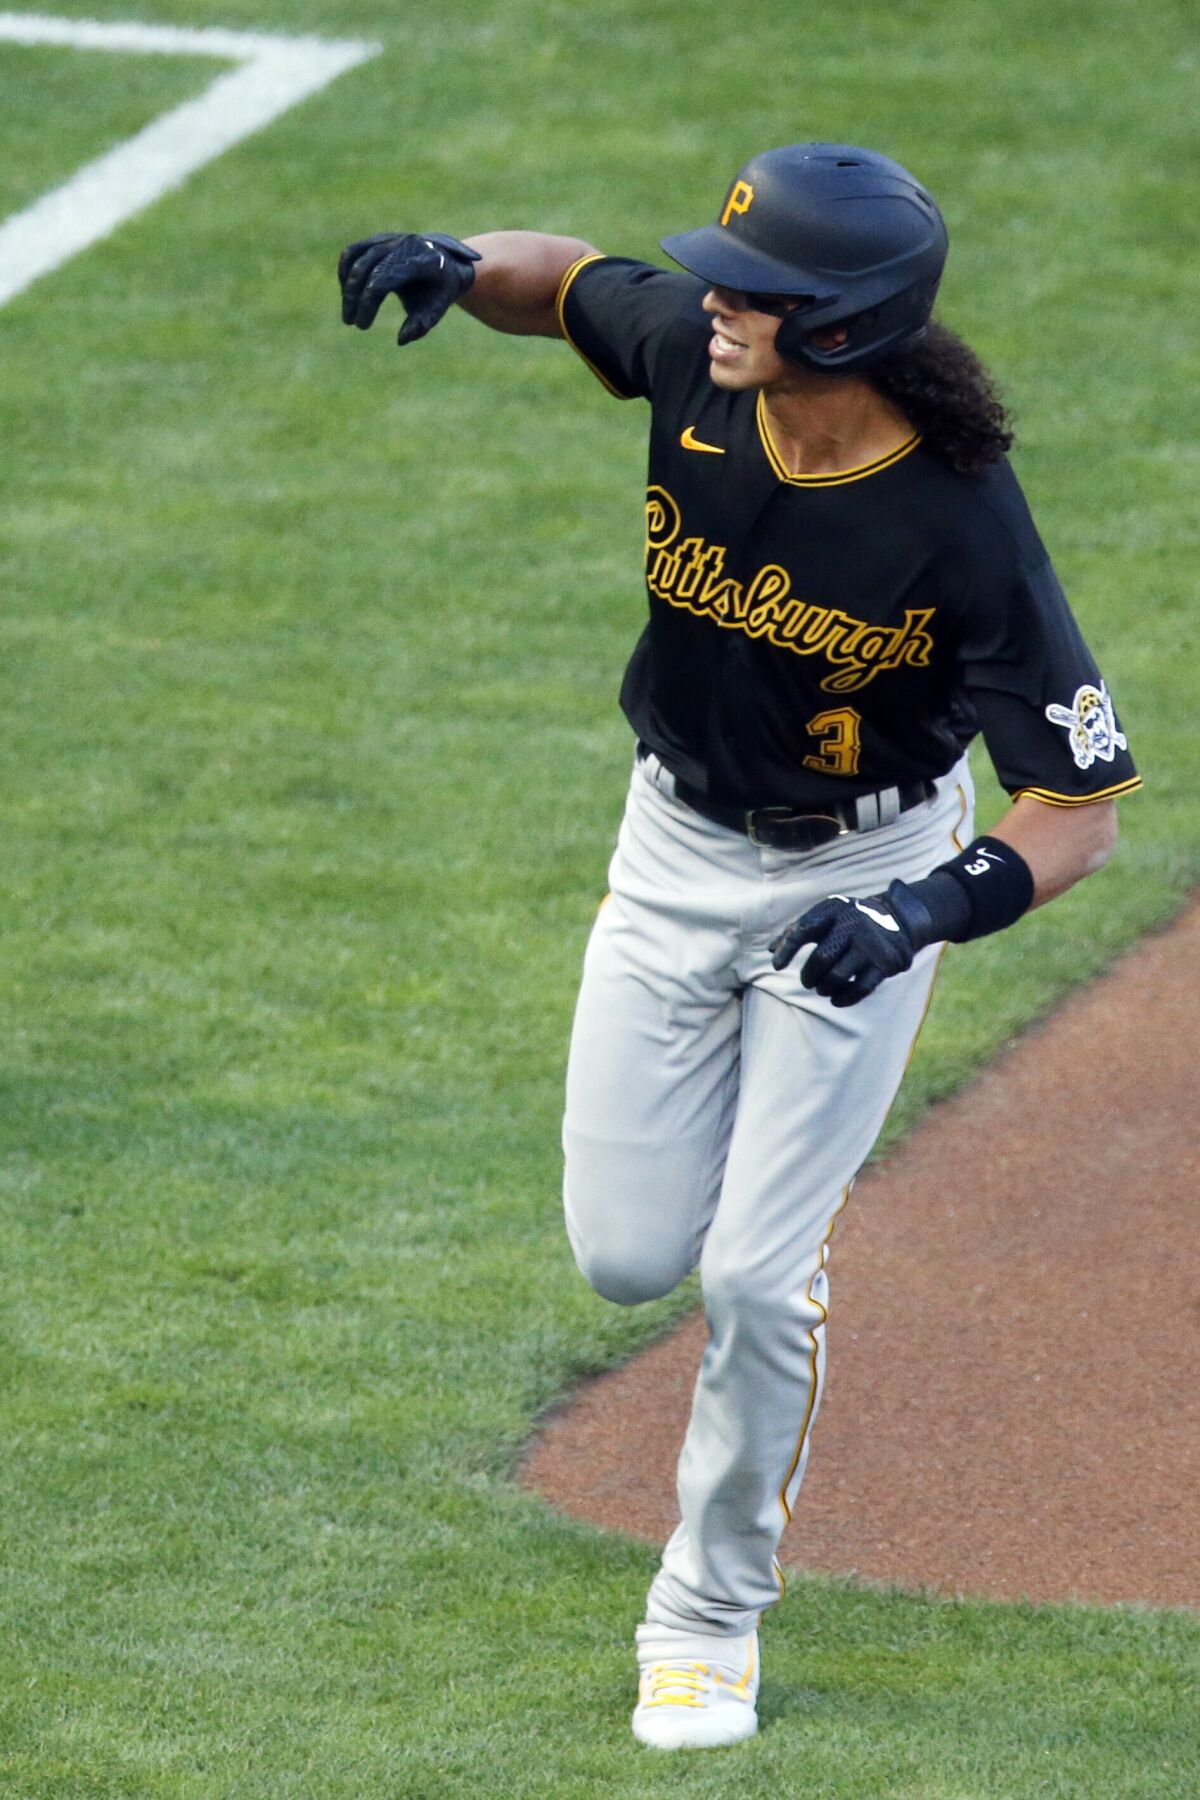 Pittsburgh Pirates' Cole Tucker runs the bases on a solo home run off Minnesota Twins pitcher Lewis Thorpe during the first inning of a baseball game Monday, Aug. 3, 2020, in Minneapolis. (AP Photo/Jim Mone)